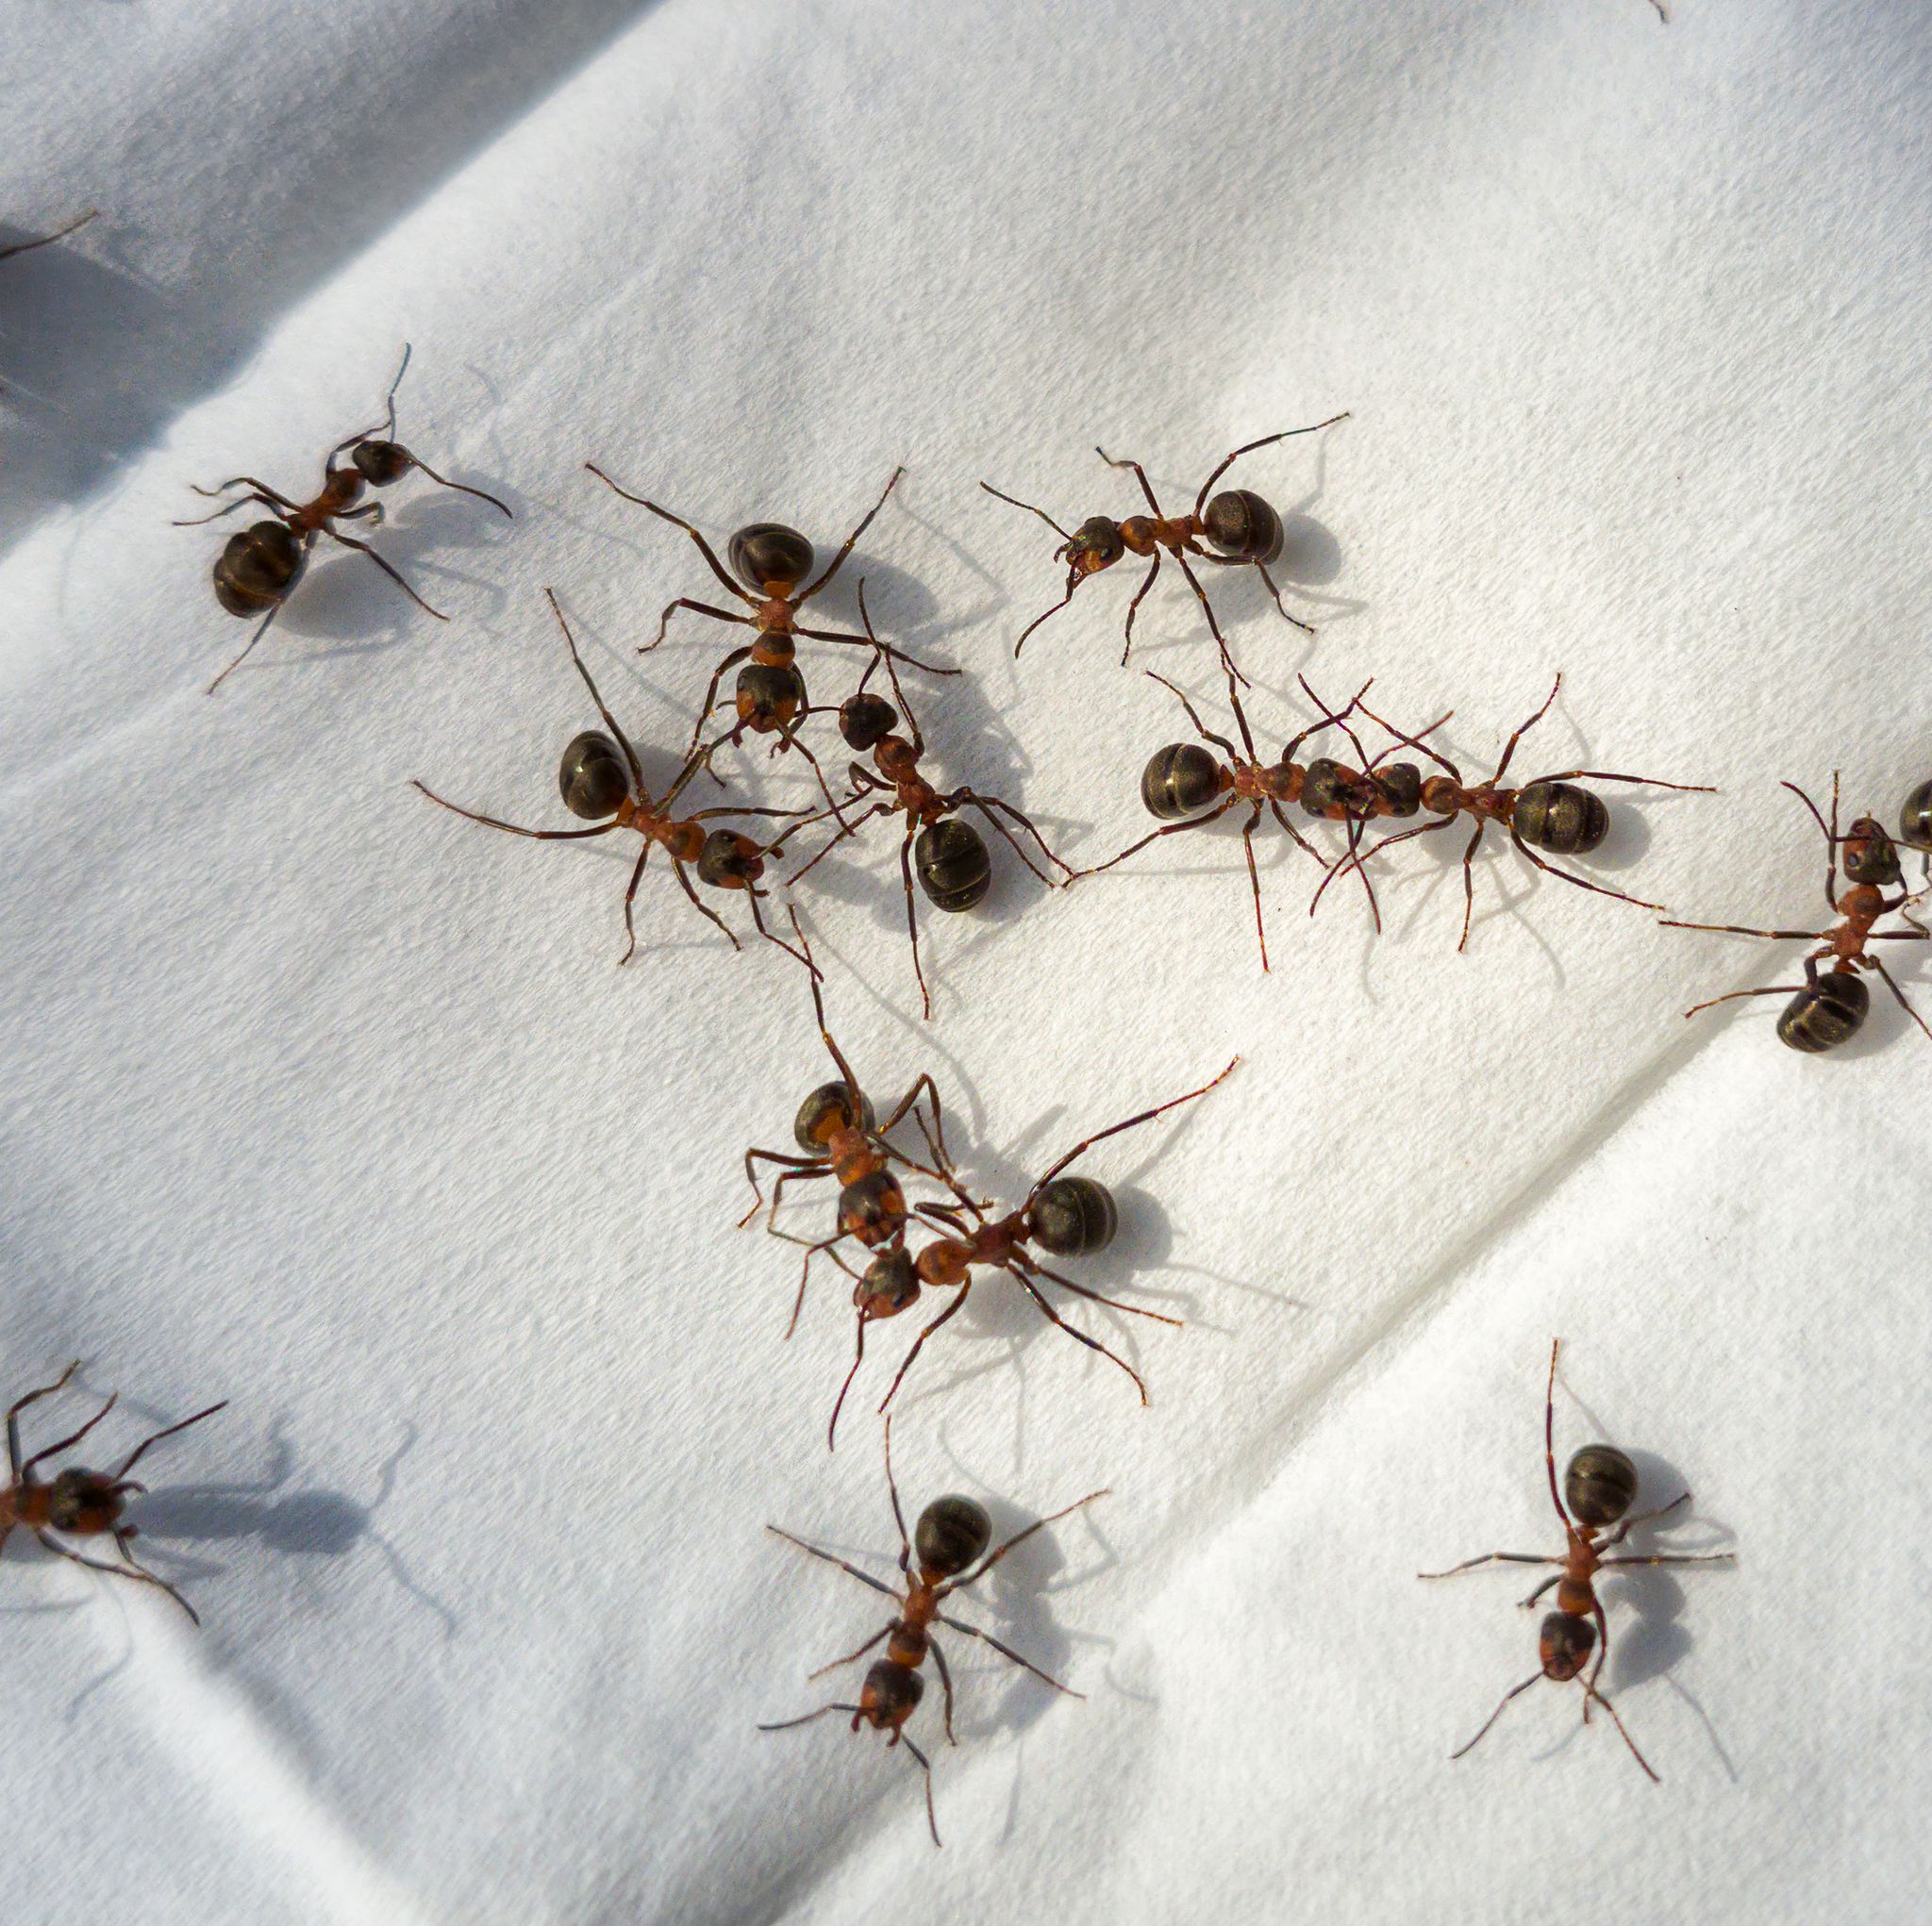 close up of ants walking on a paper handkerchief thrown into an anthill